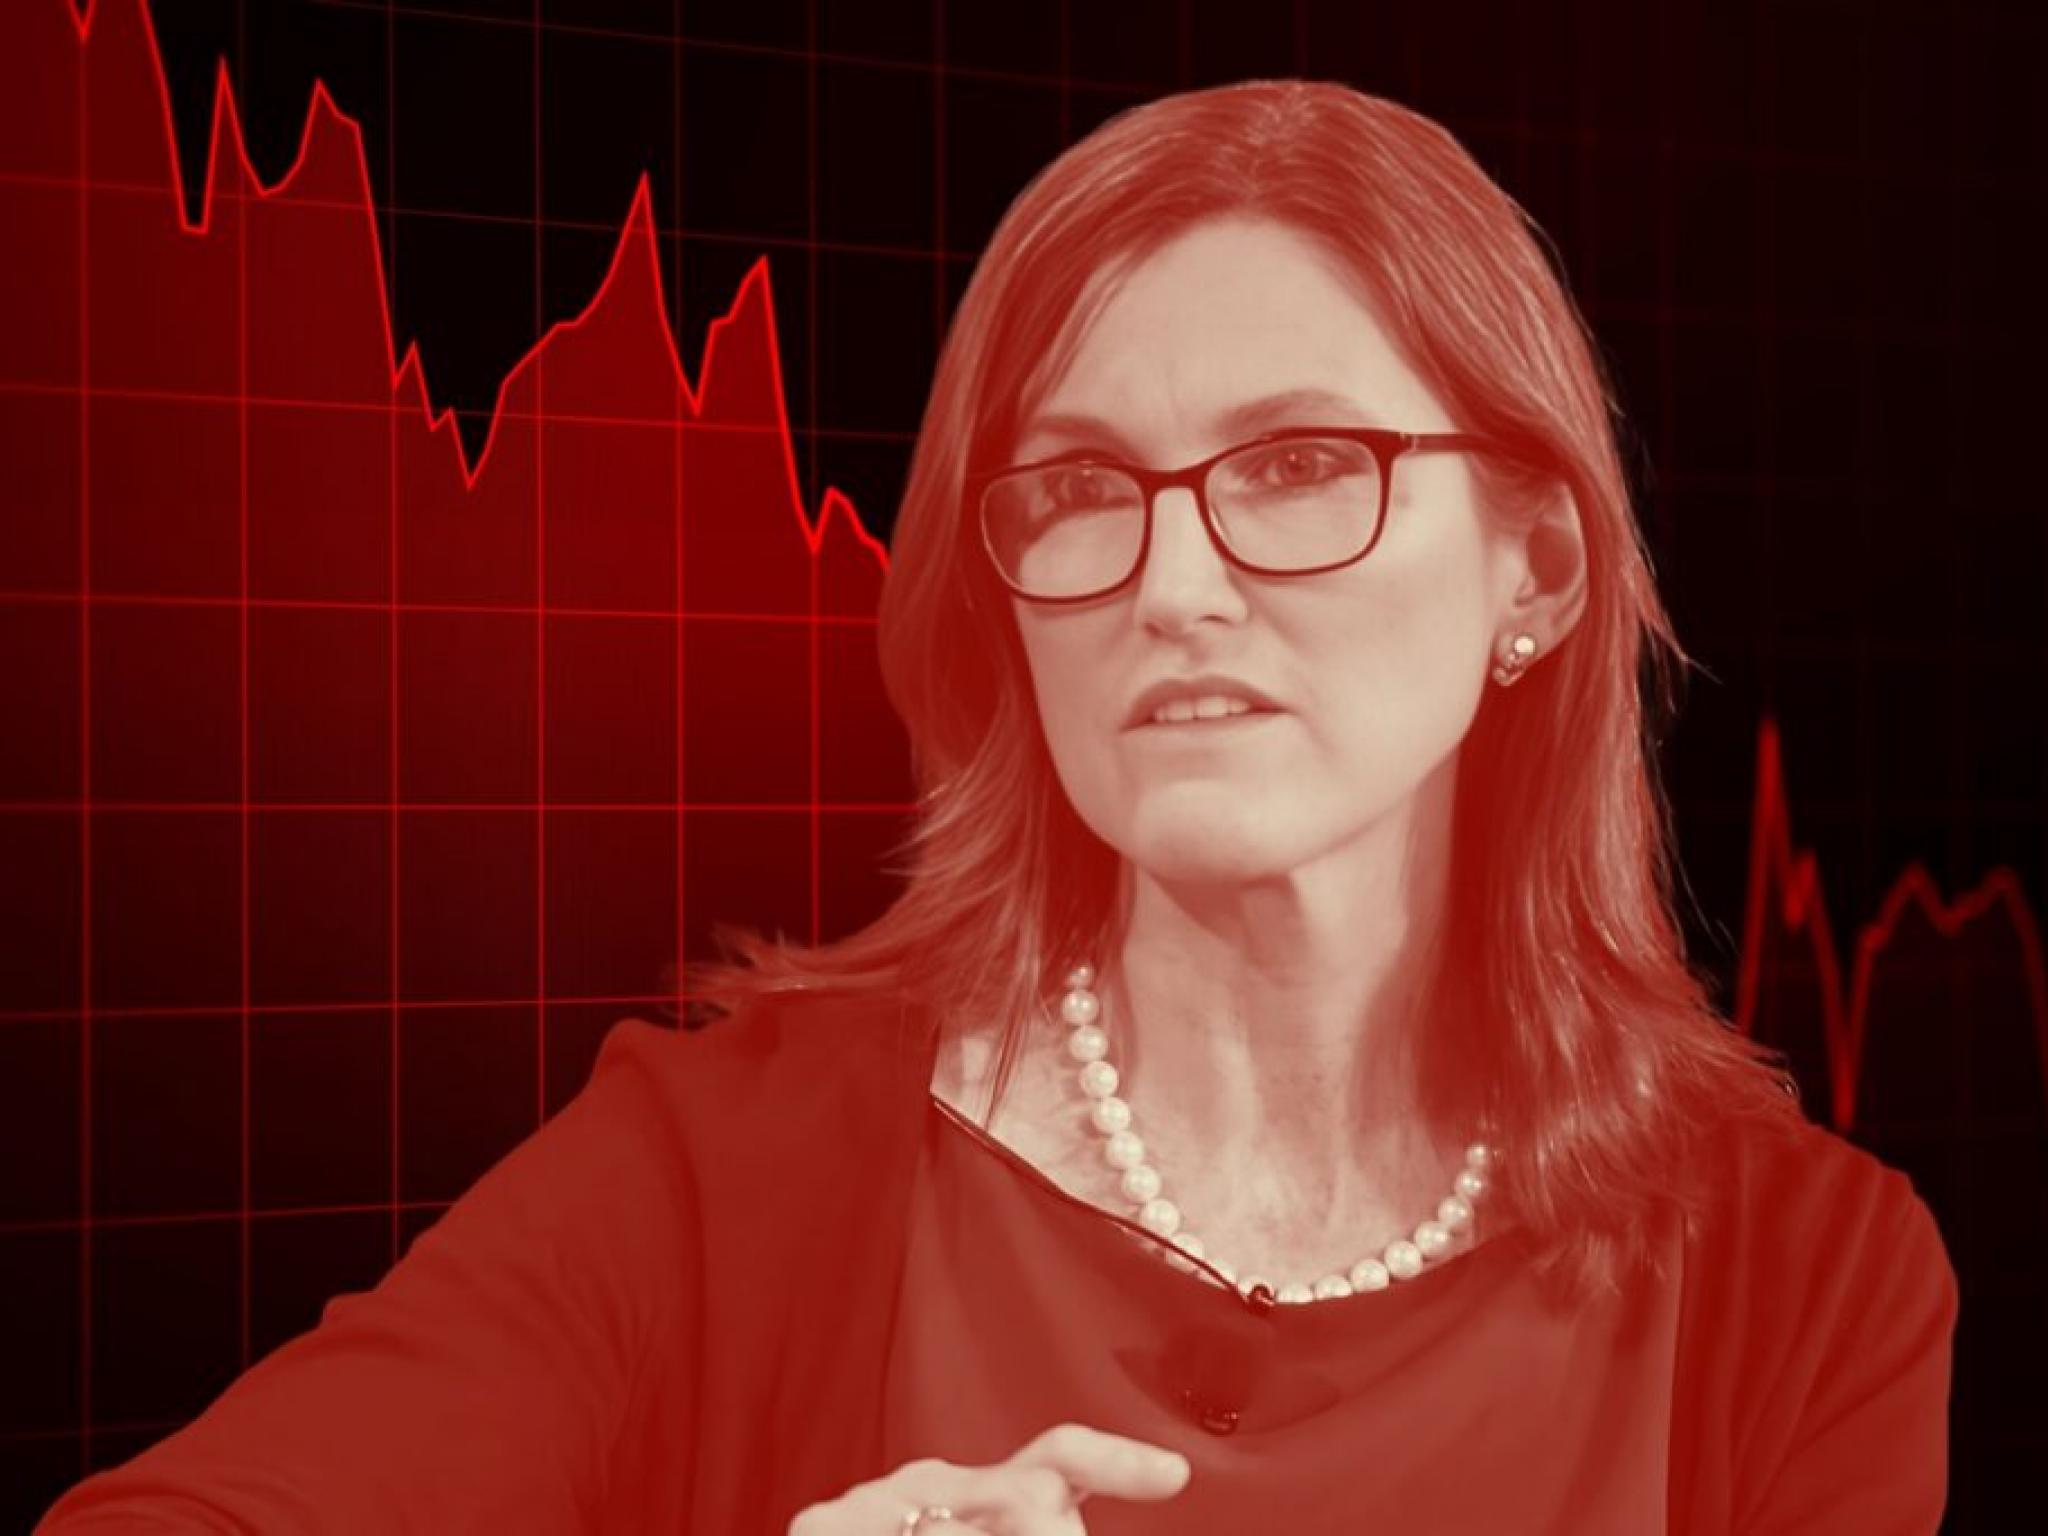  investment-advisor-says-throwing-random-darts-at-tickers-would-beat-arkk-as-cathie-woods-flagship-fund-lags-far-behind-soaring-market-how-do-they-do-it 